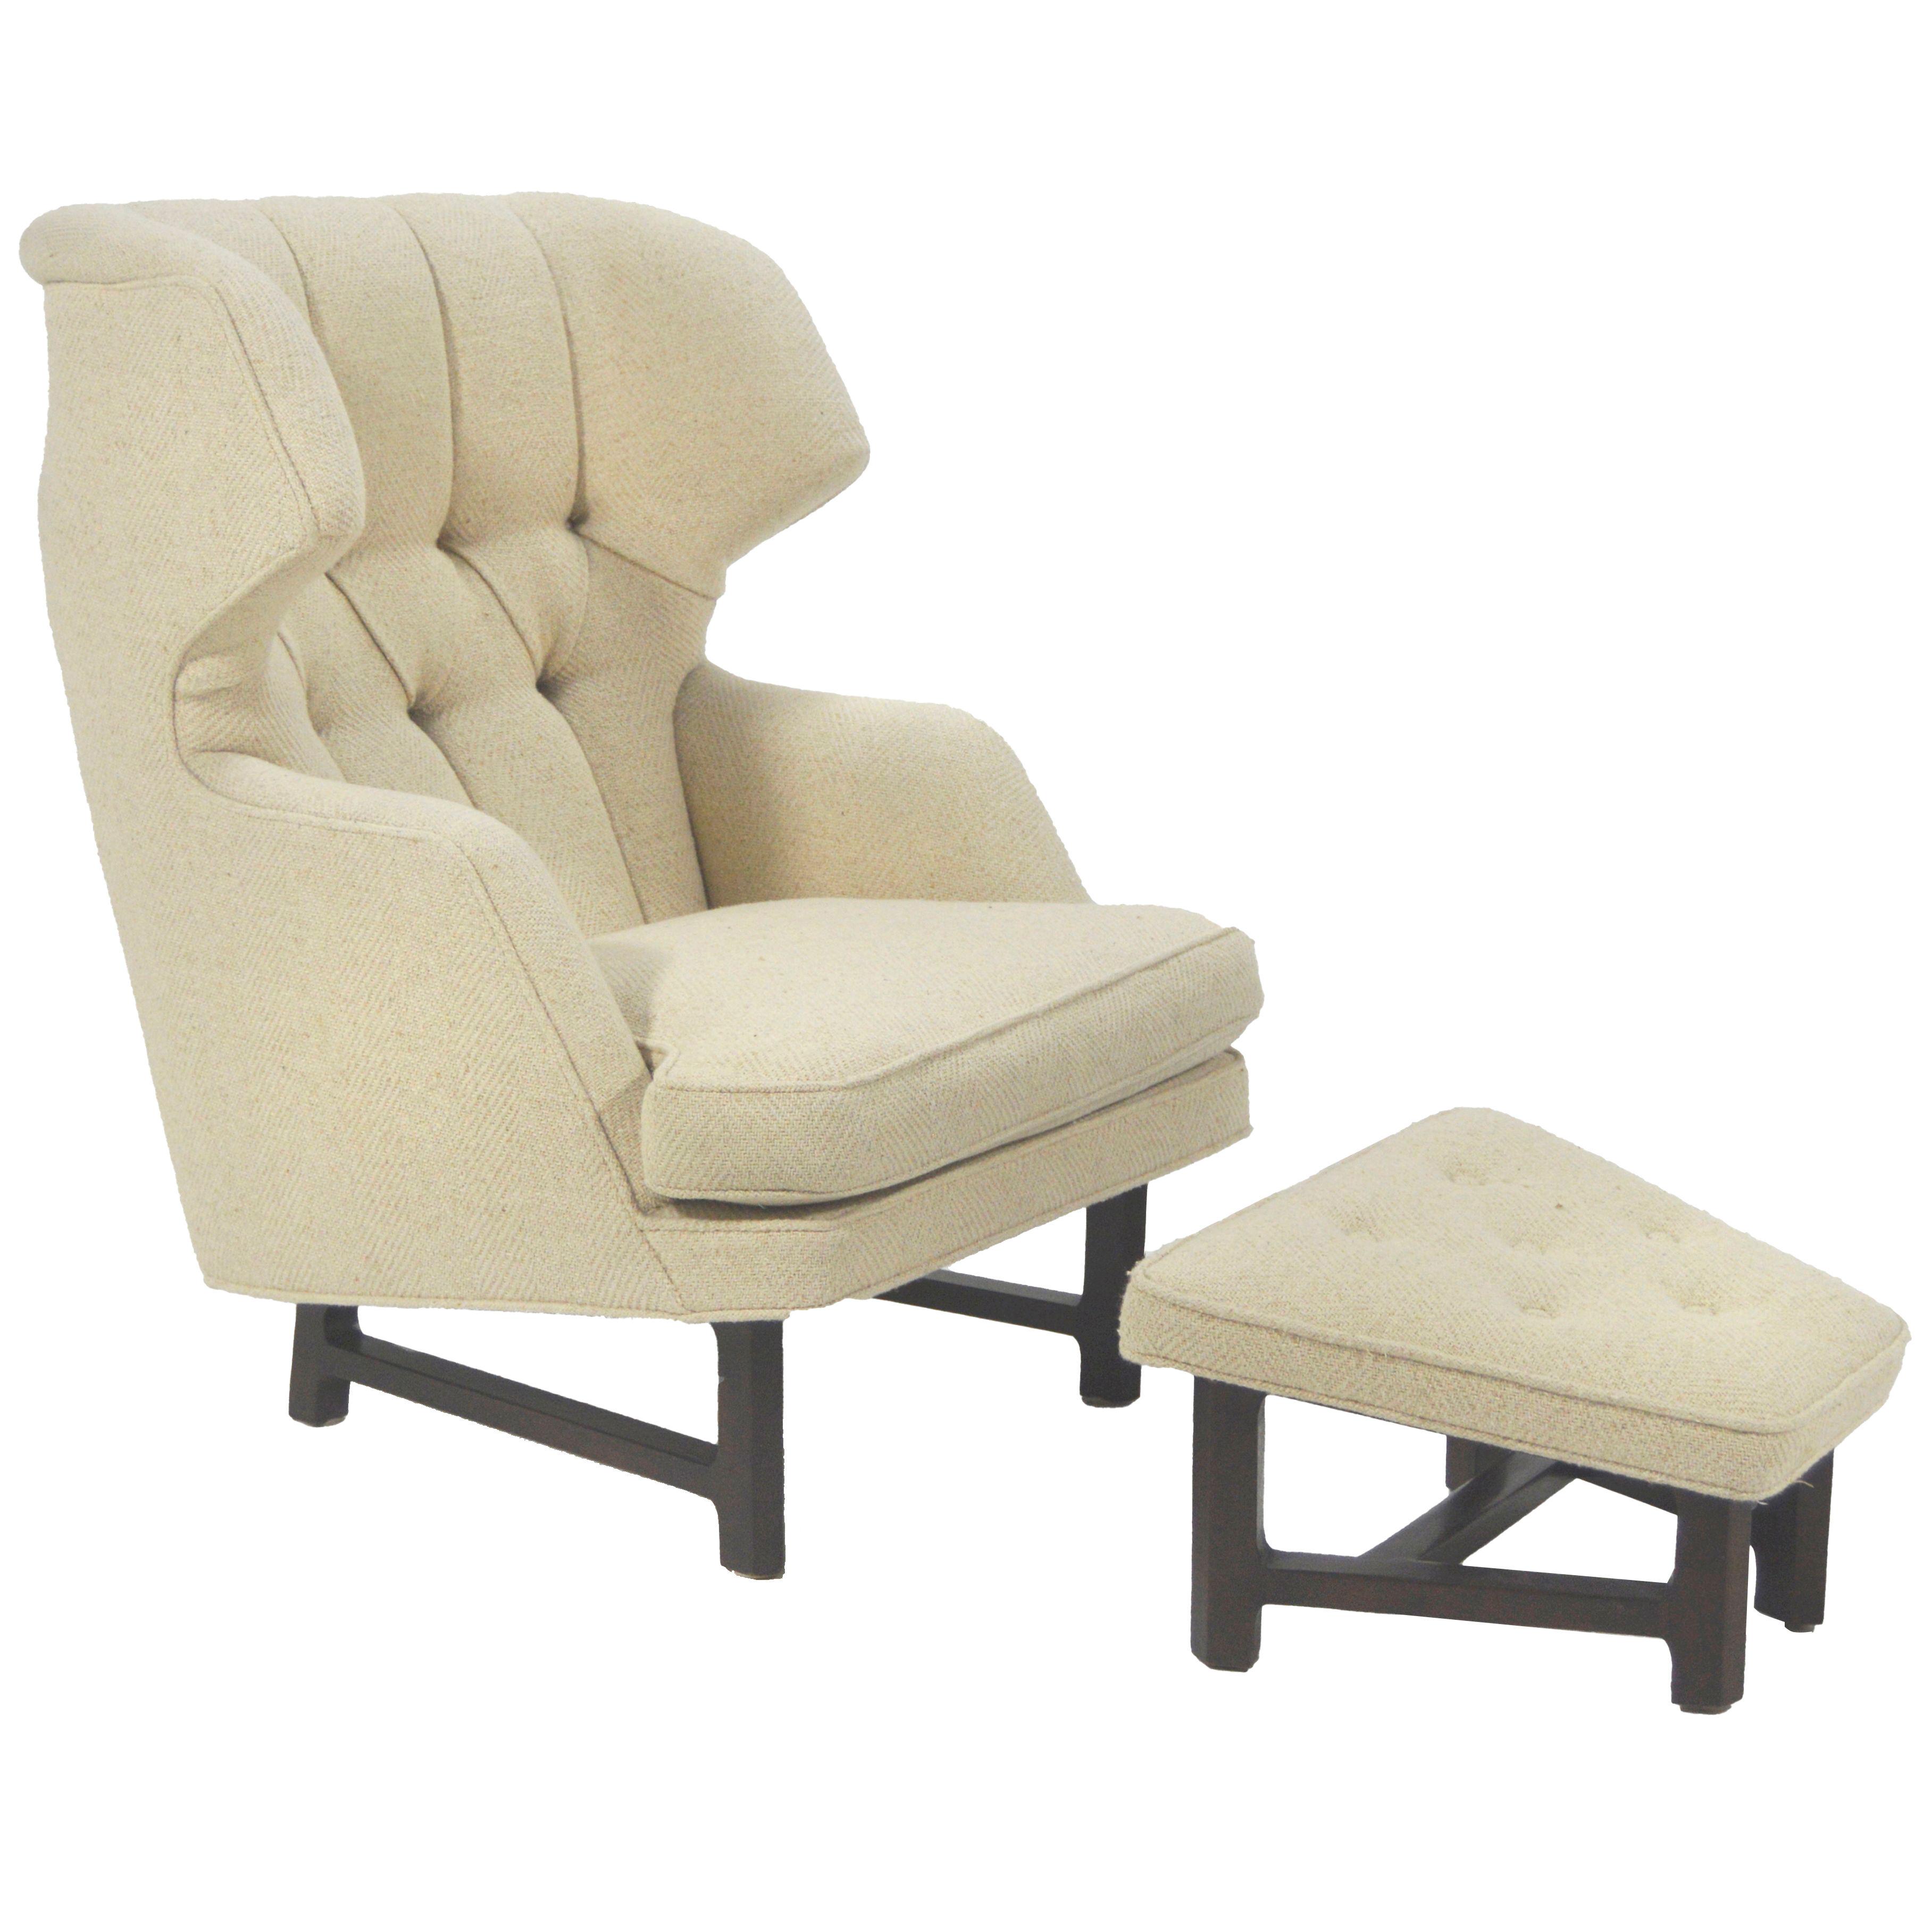 Edward Wormley Model 5761 Janus Wingback Chair and Ottoman